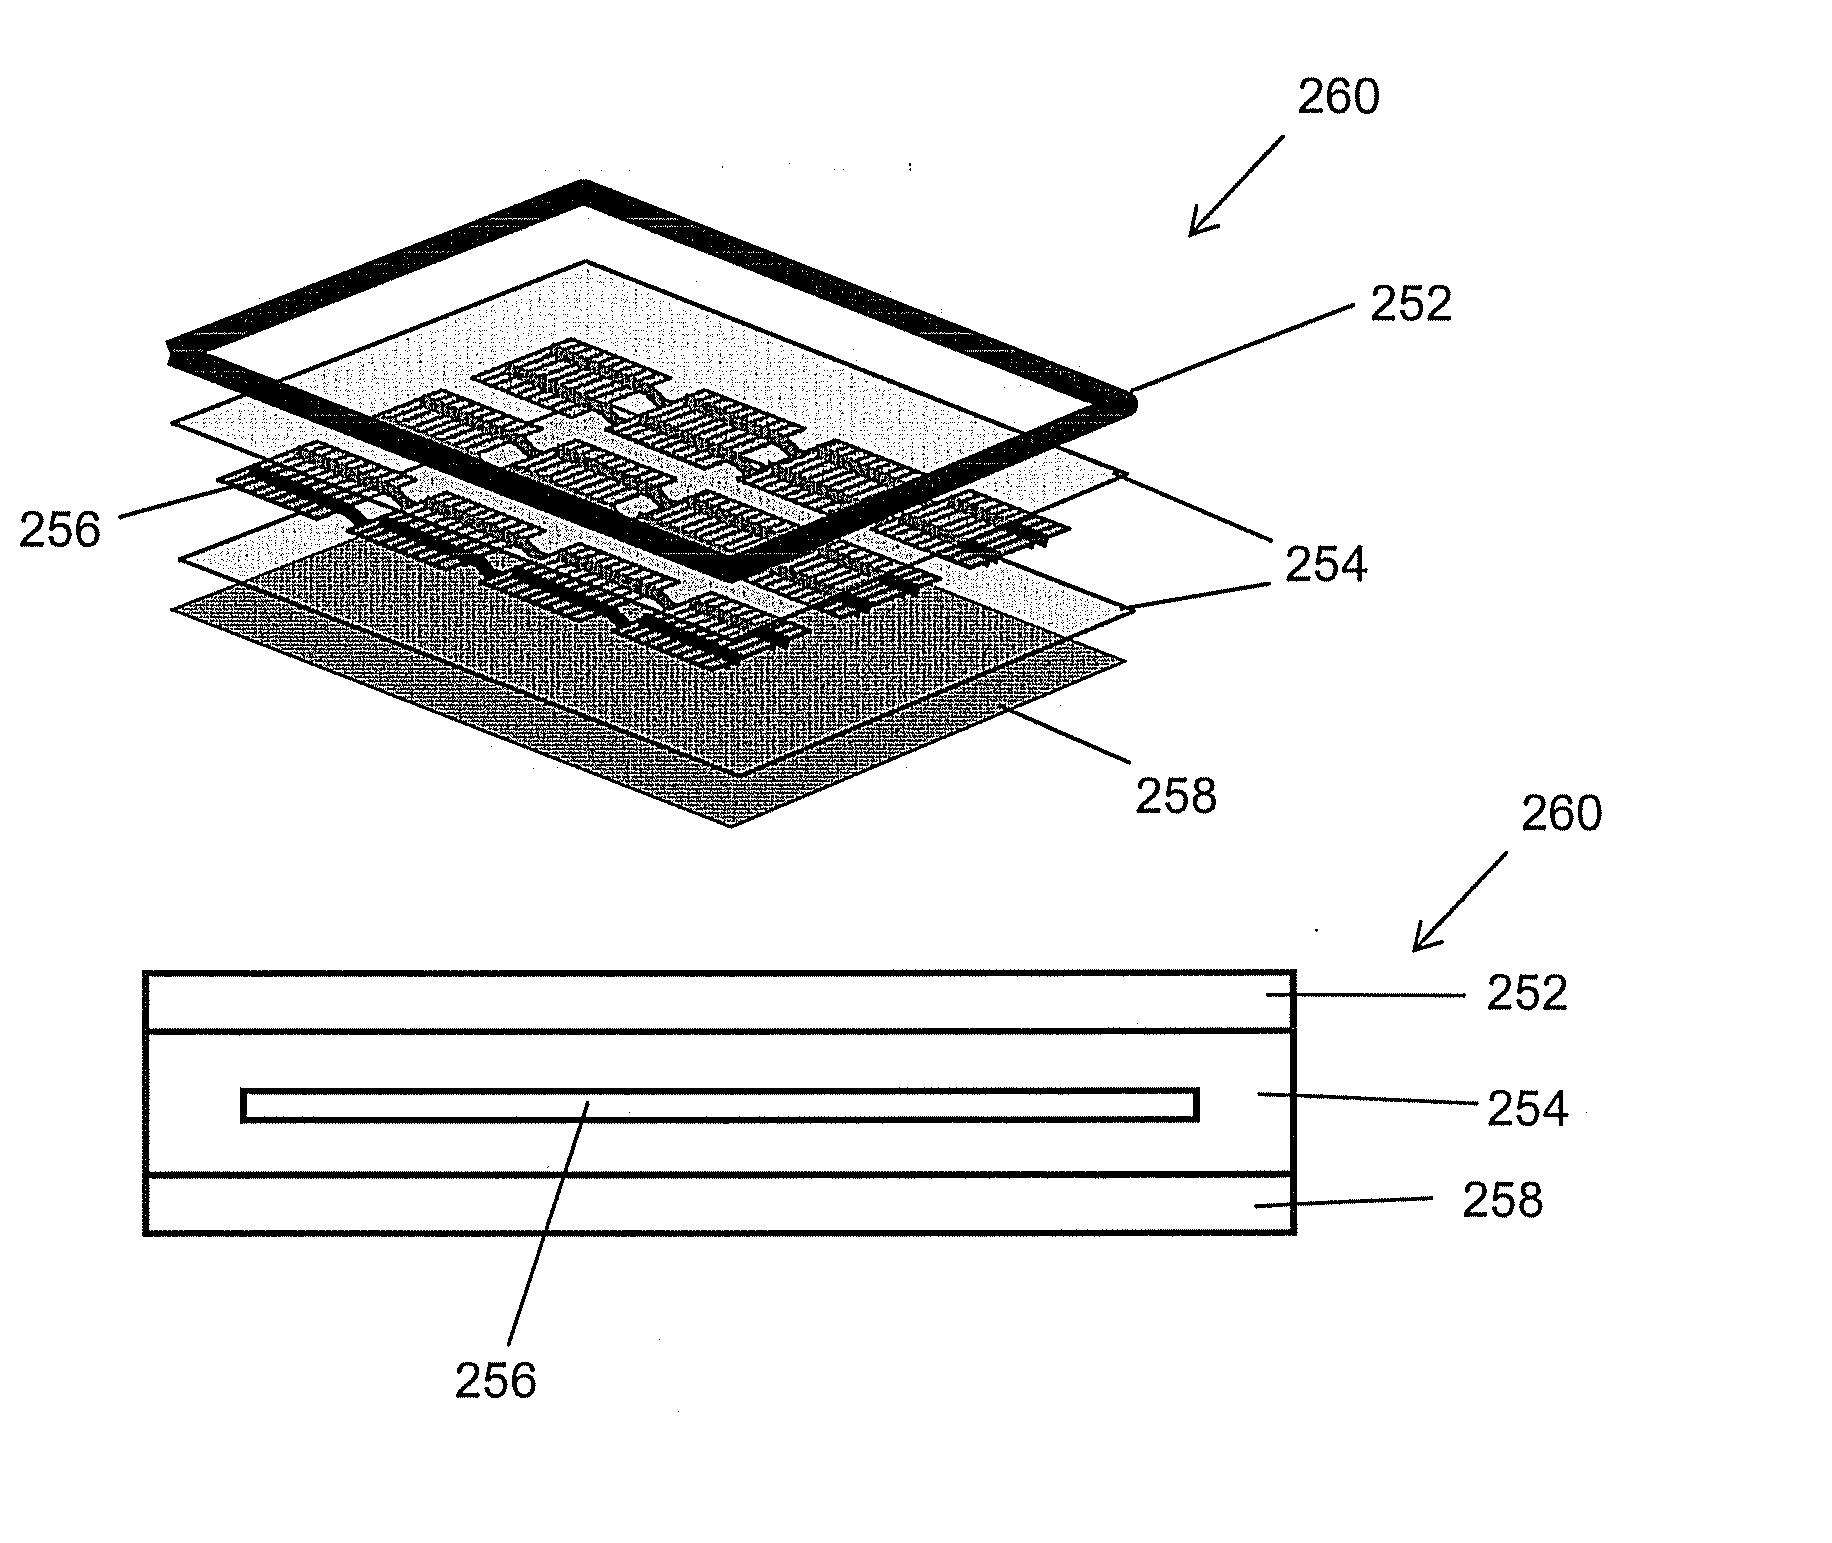 Roofing Products Having Receptor Zones and Photovoltaic Roofing Elements and Systems Using Them